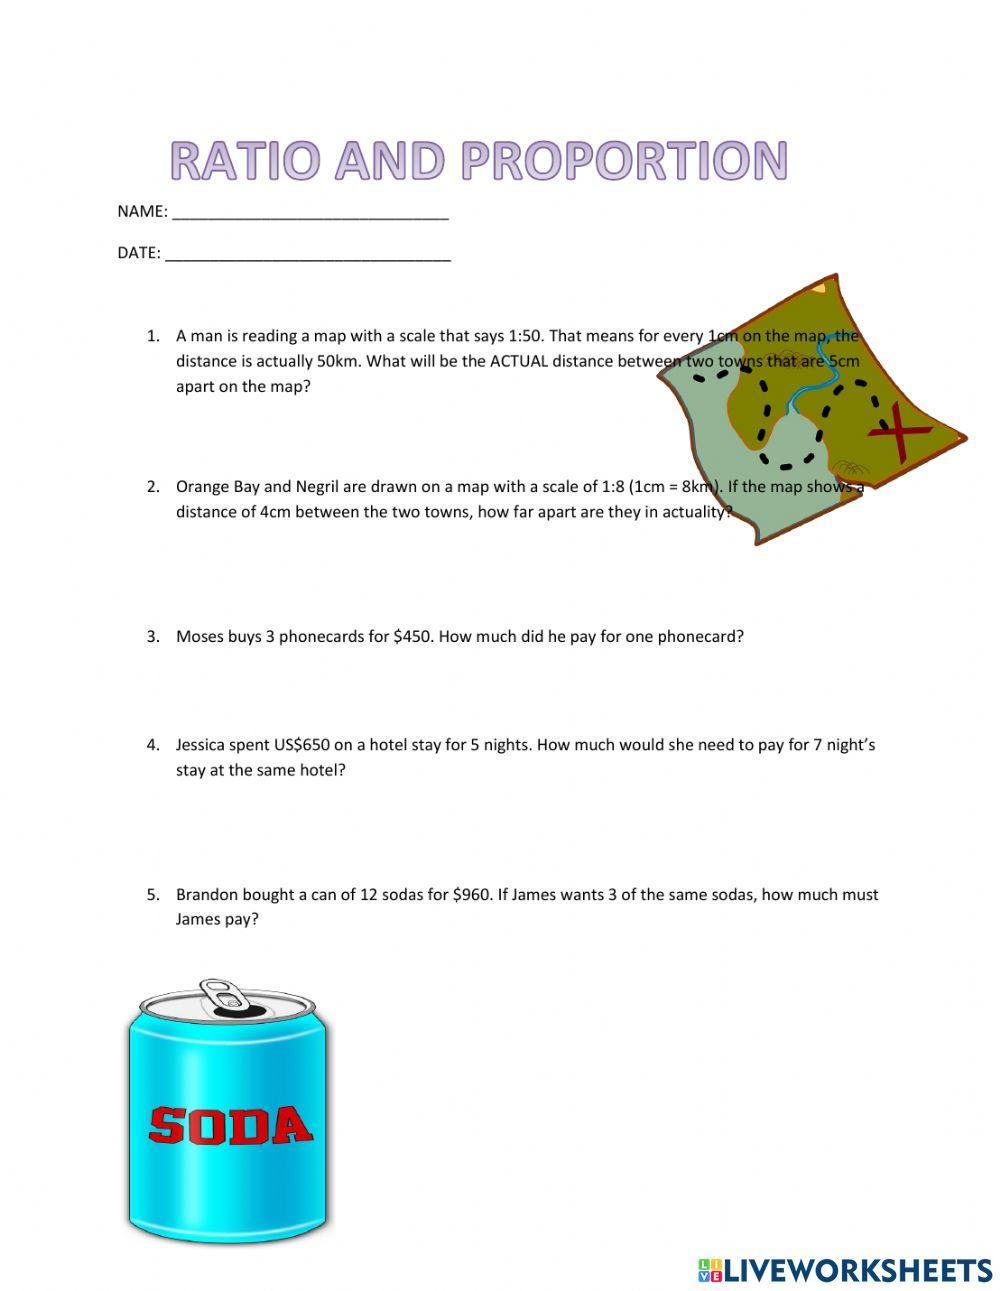 Ratio and proportion